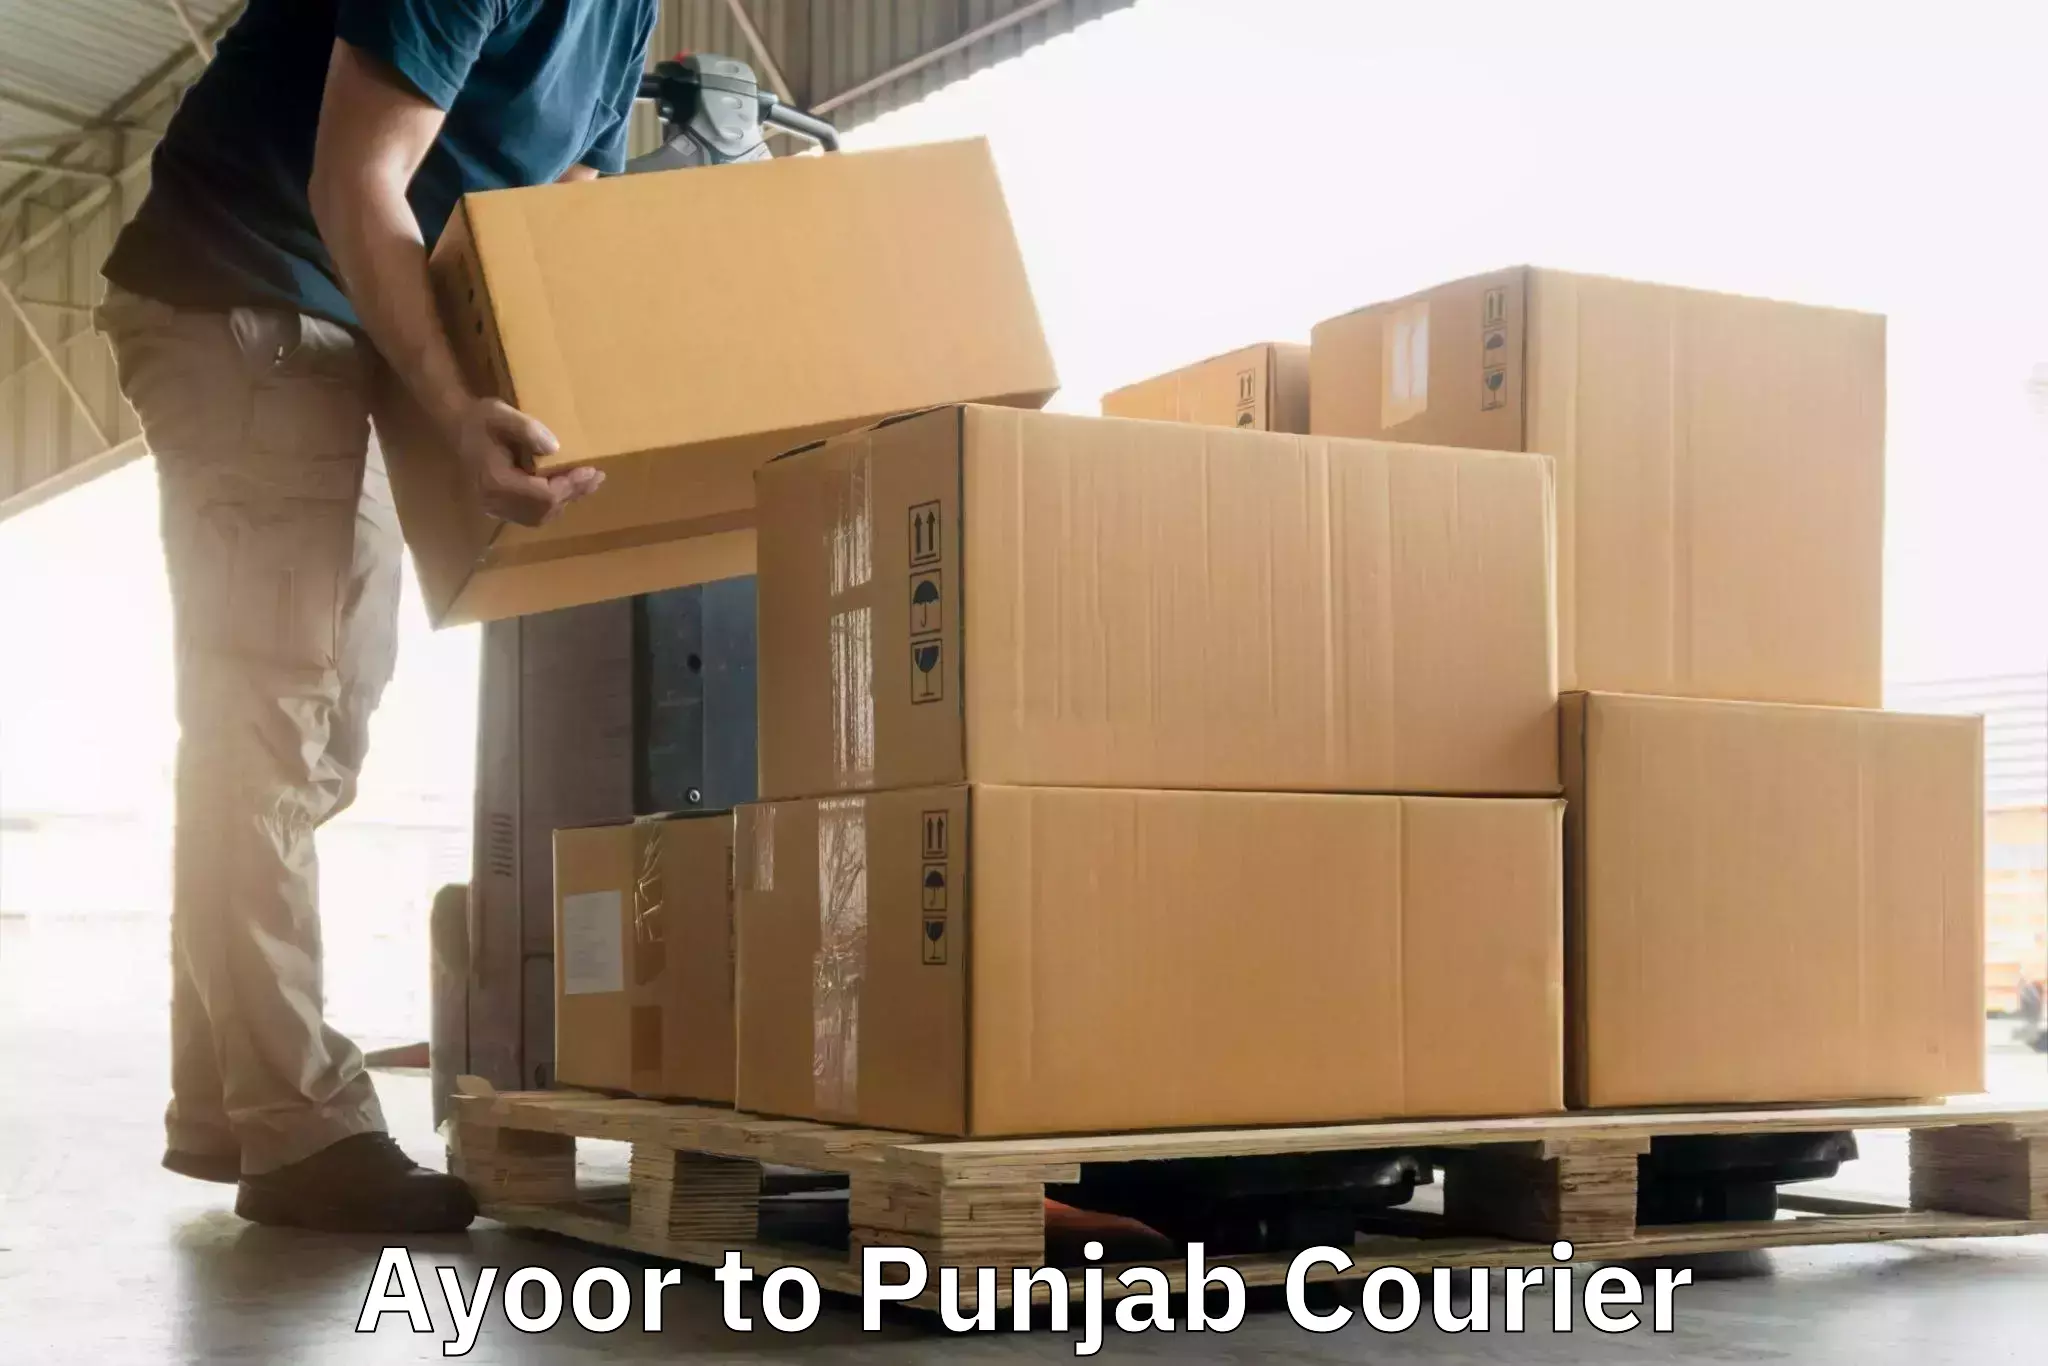 Same-day delivery solutions Ayoor to Faridkot